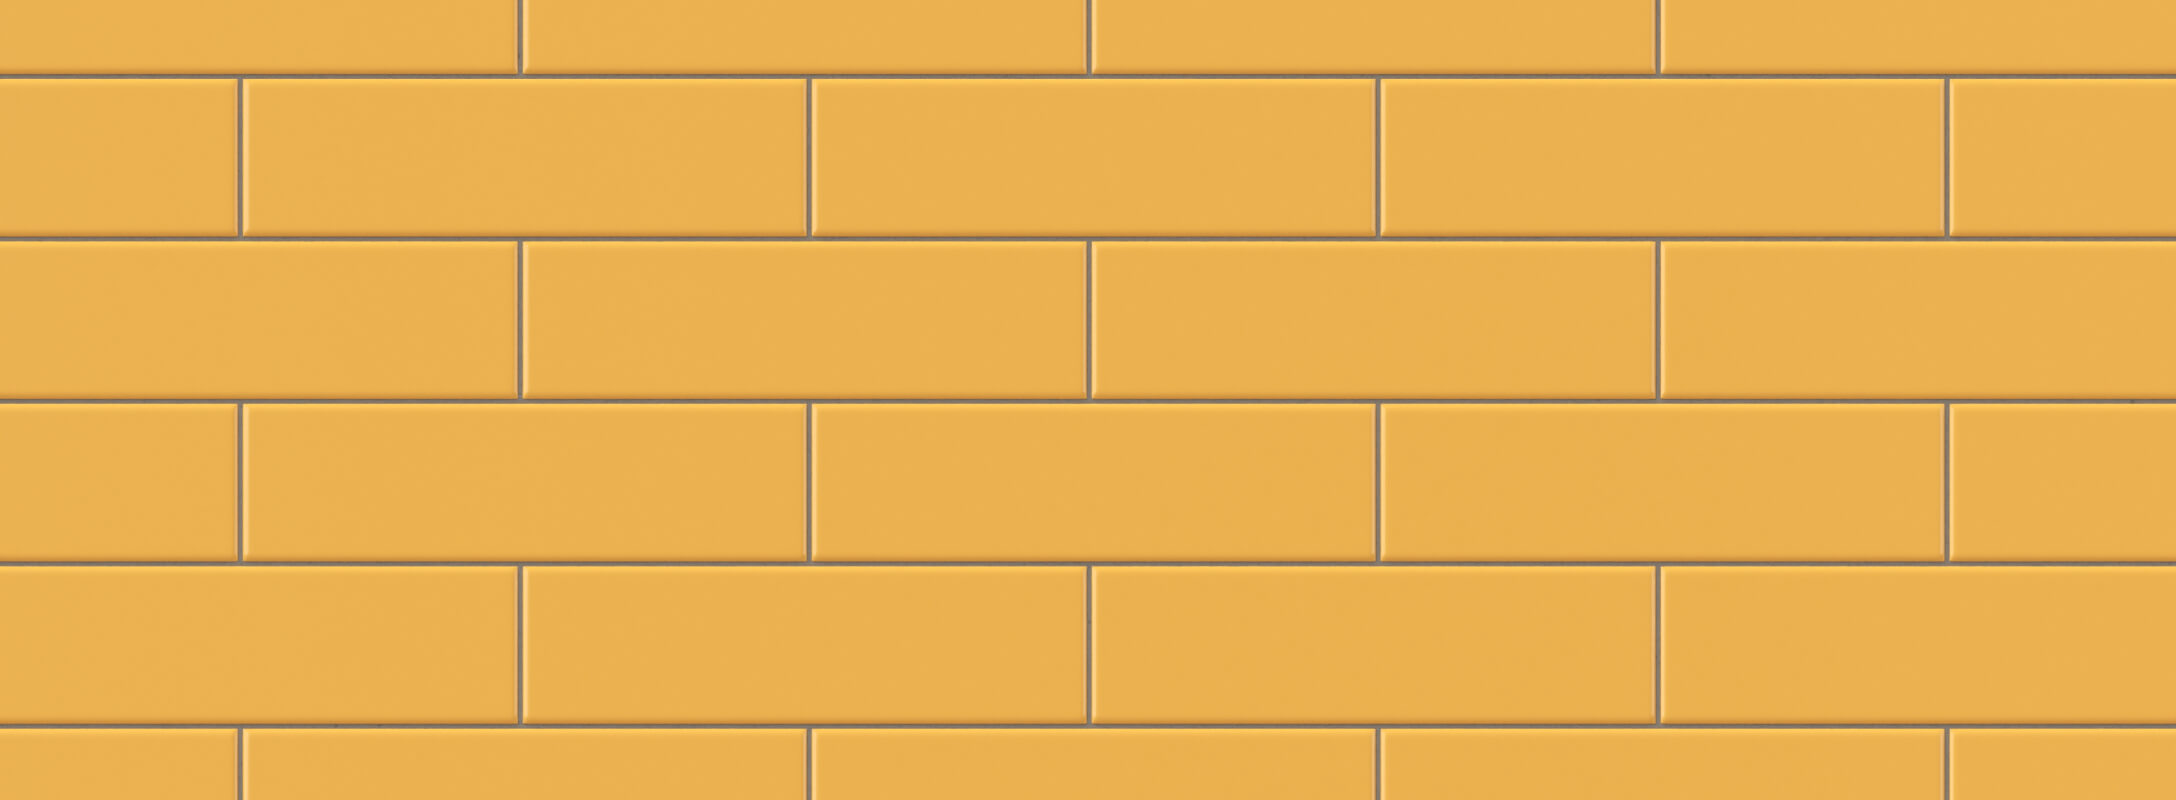 Smooth, golden yellow rectangular tiles in a stacked layout, adding a warm, sunlit ambiance to any space